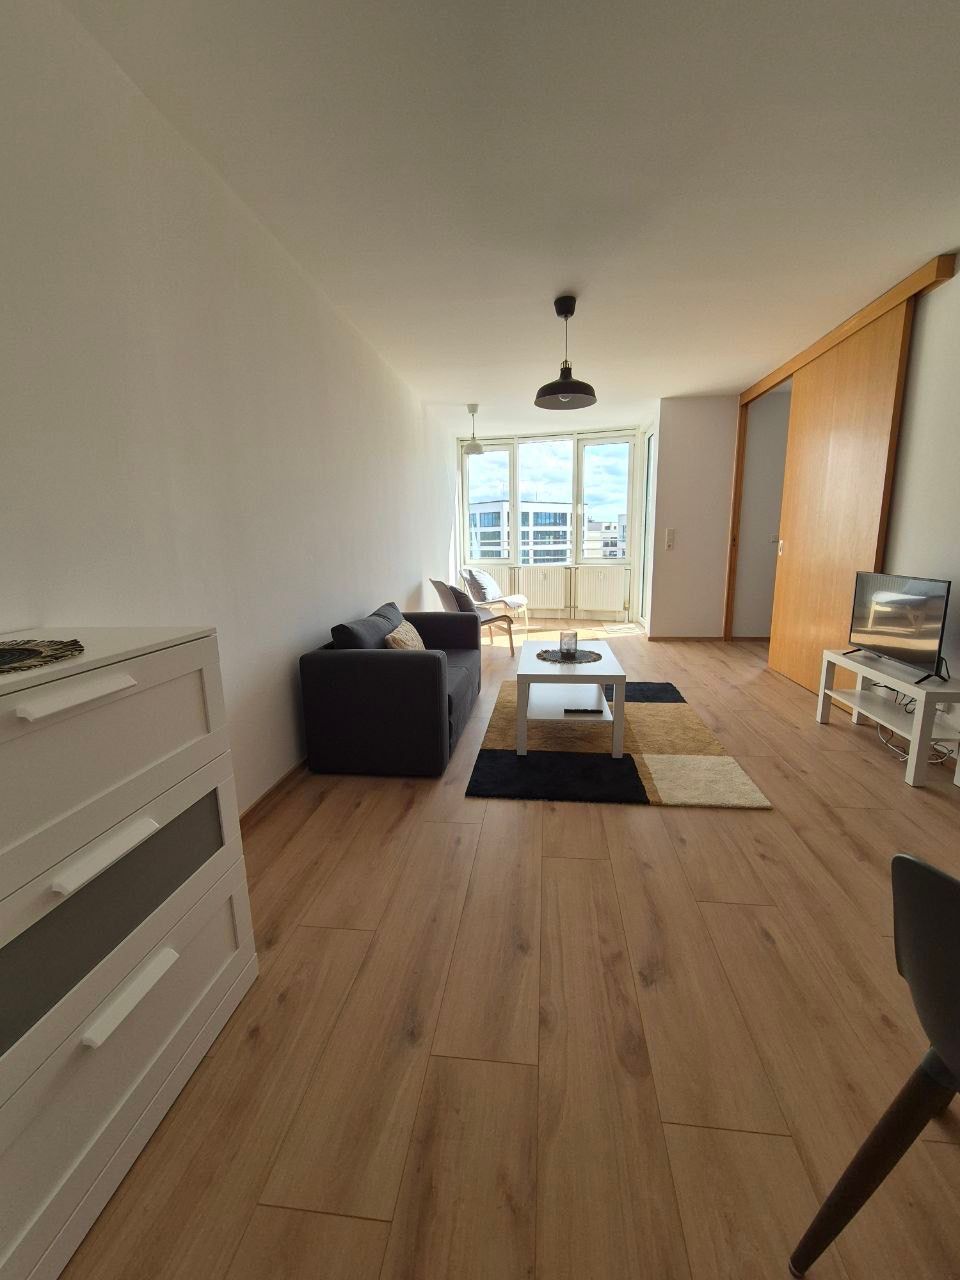 Exclusive furnished apartment in prime location in Berlin  High-quality, barrier-free apartment near the main train station and government district